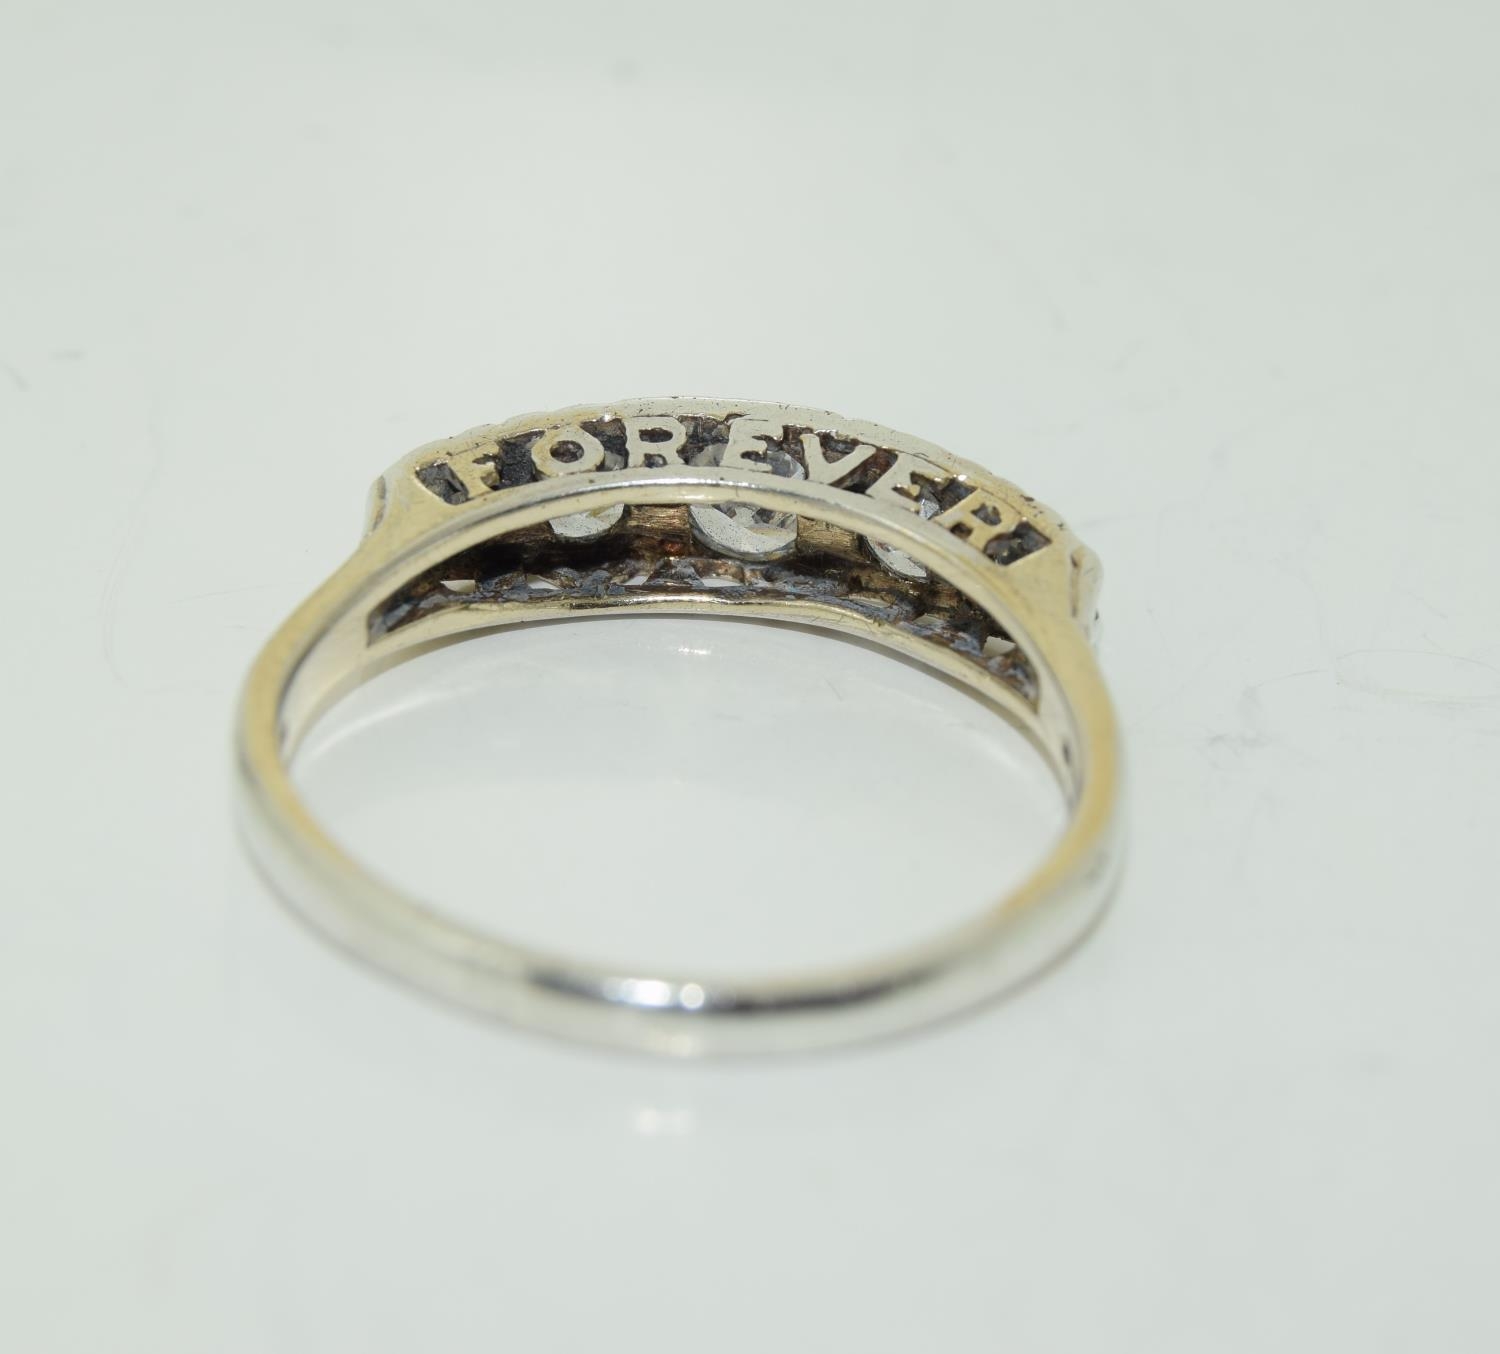 Large 'Always Forever' CZ 925 silver ring, Size W. - Image 3 of 4